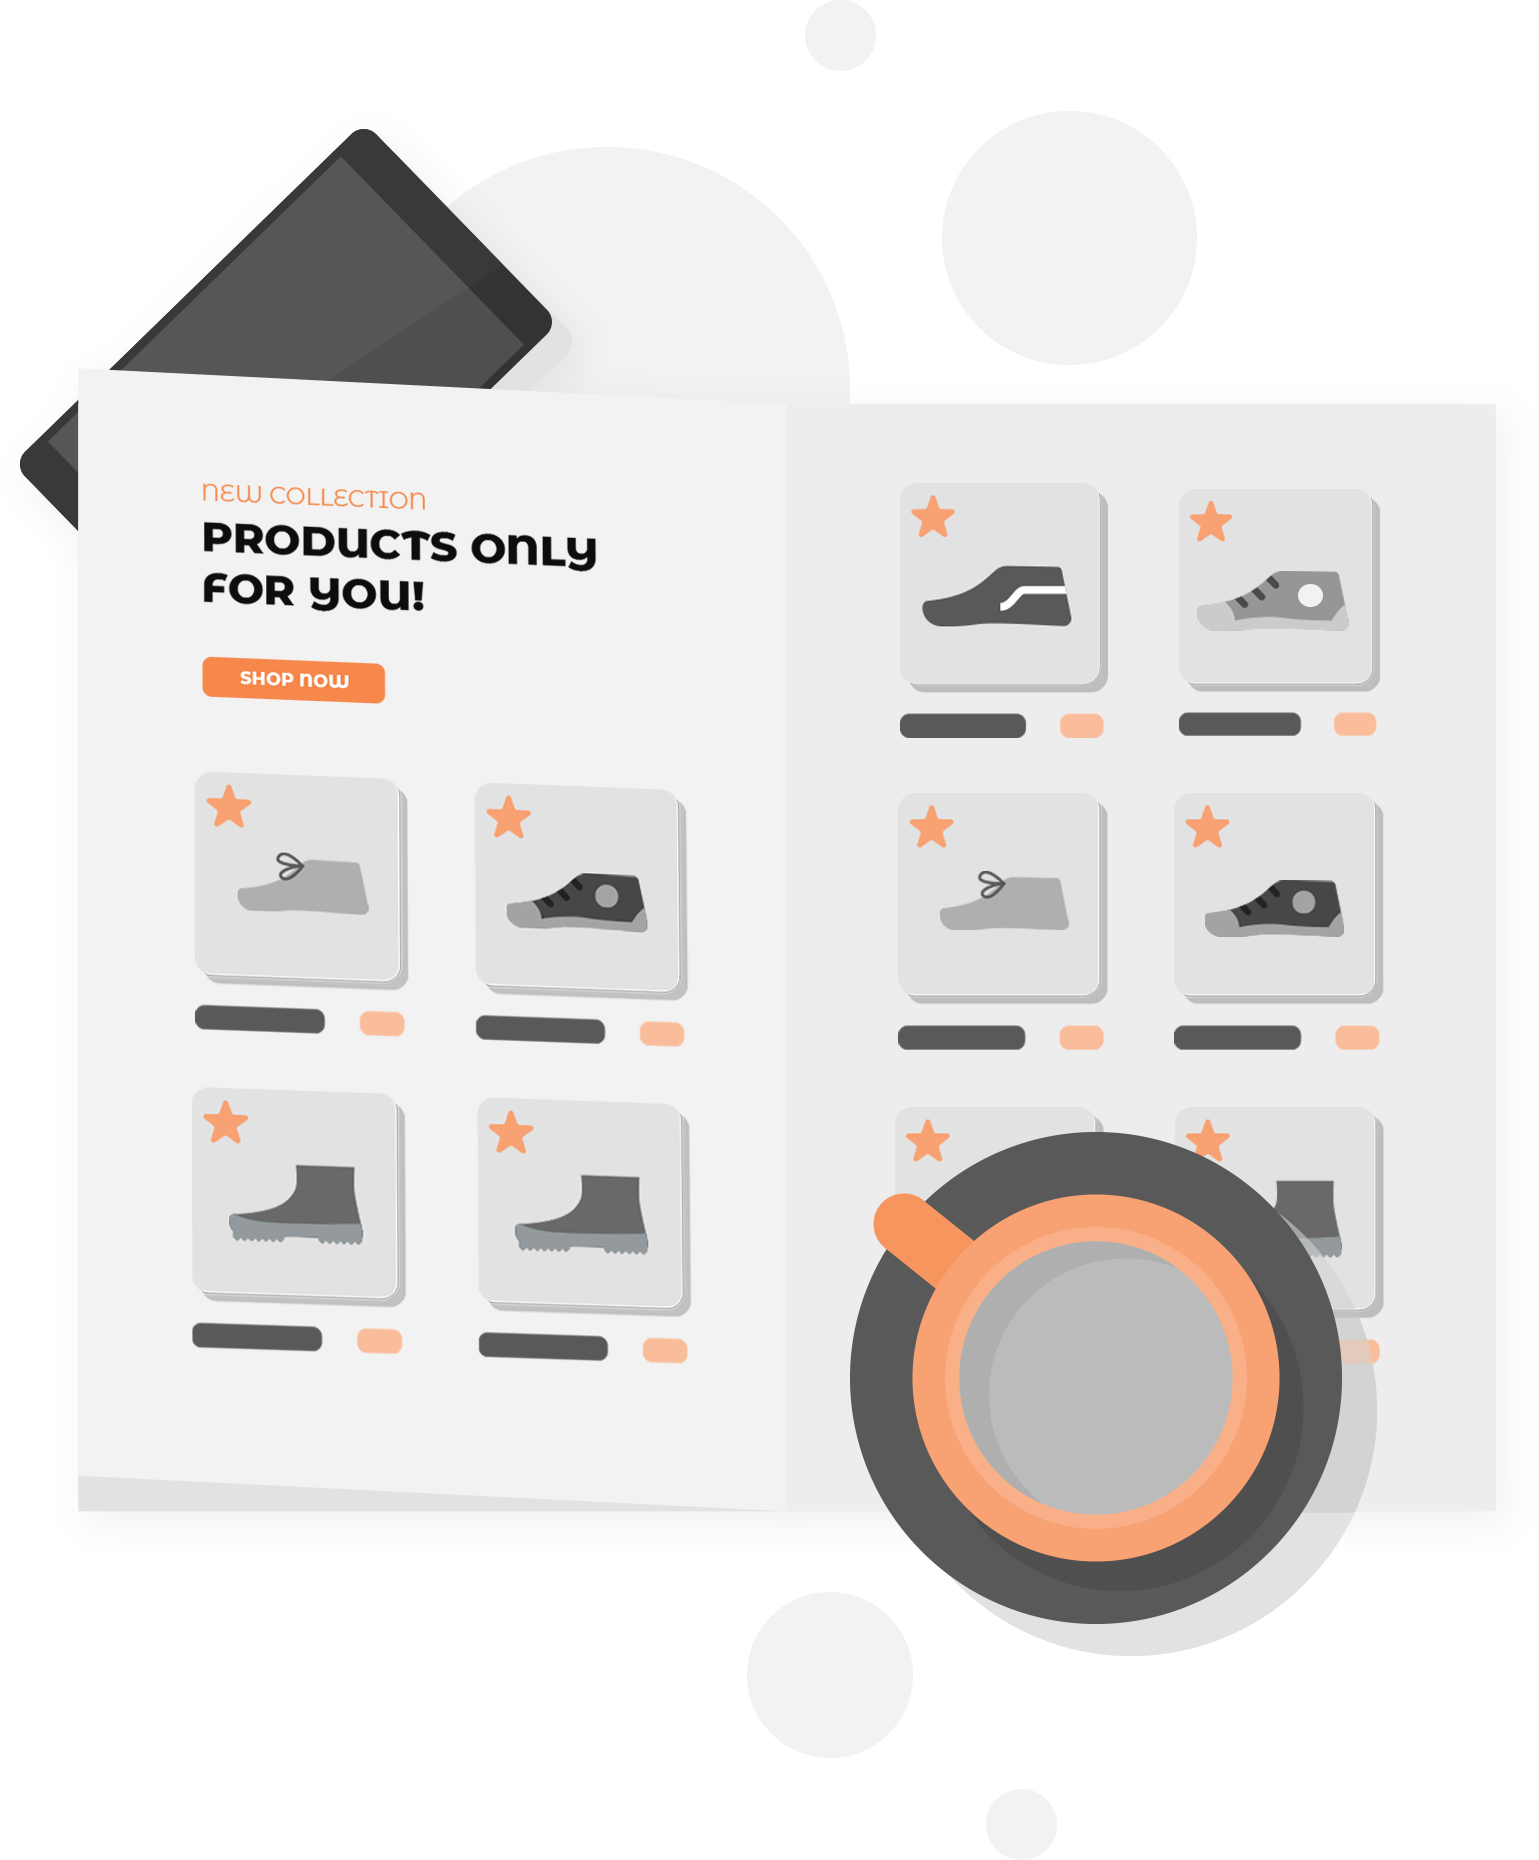 An image illustration of the specific quiz product category showcased and displayed for website visitors.